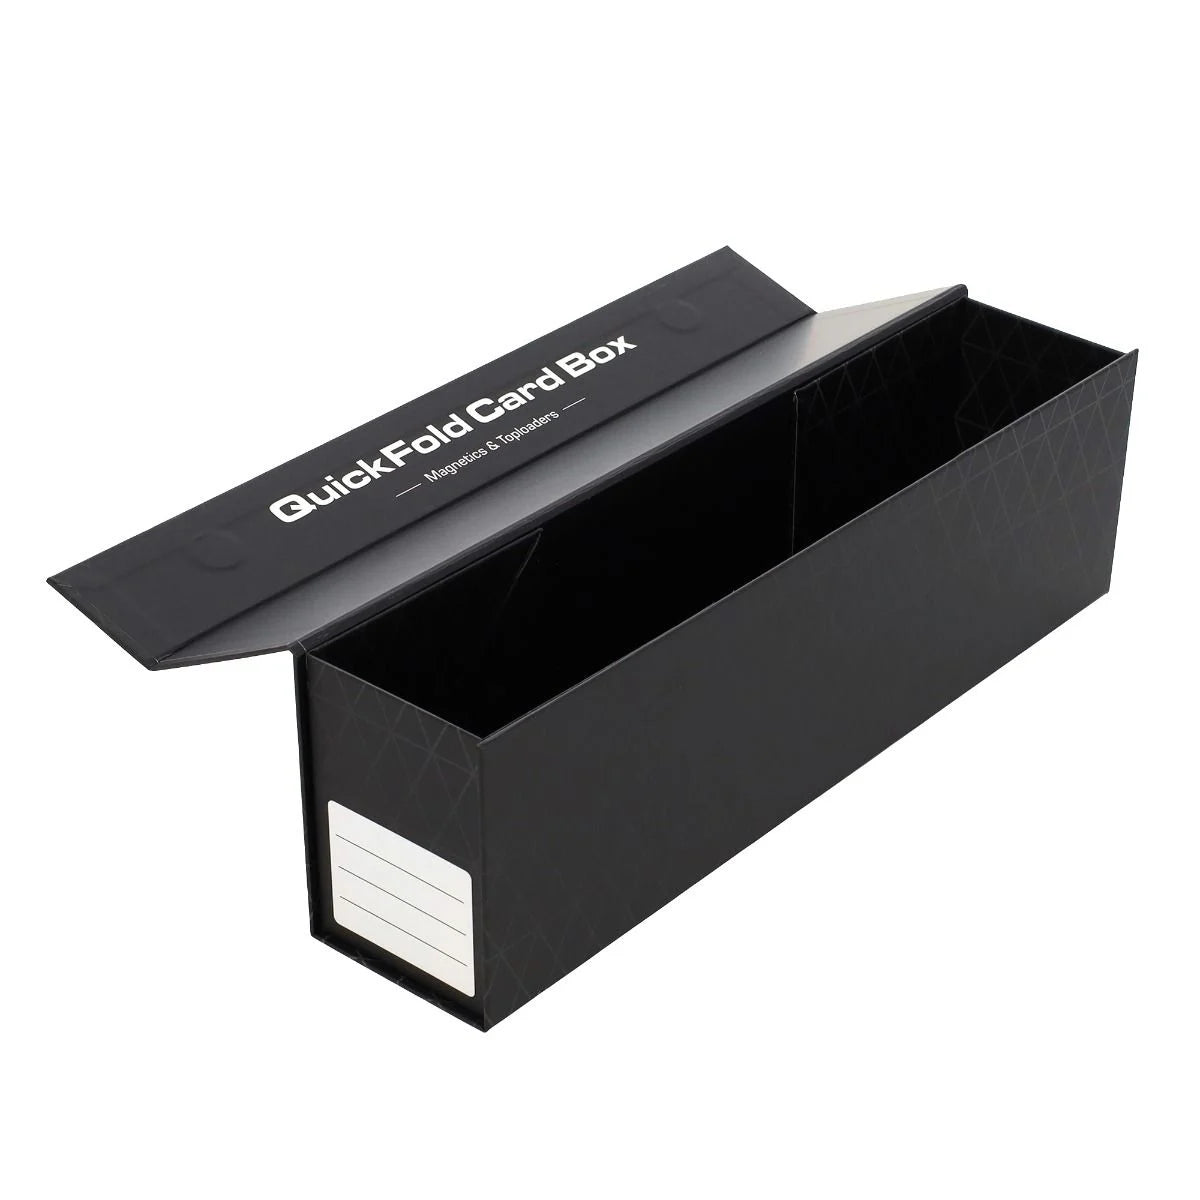 BCW SUPPLIES: QUICKFOLD CARD BOXES (3CT) | Gamers Paradise